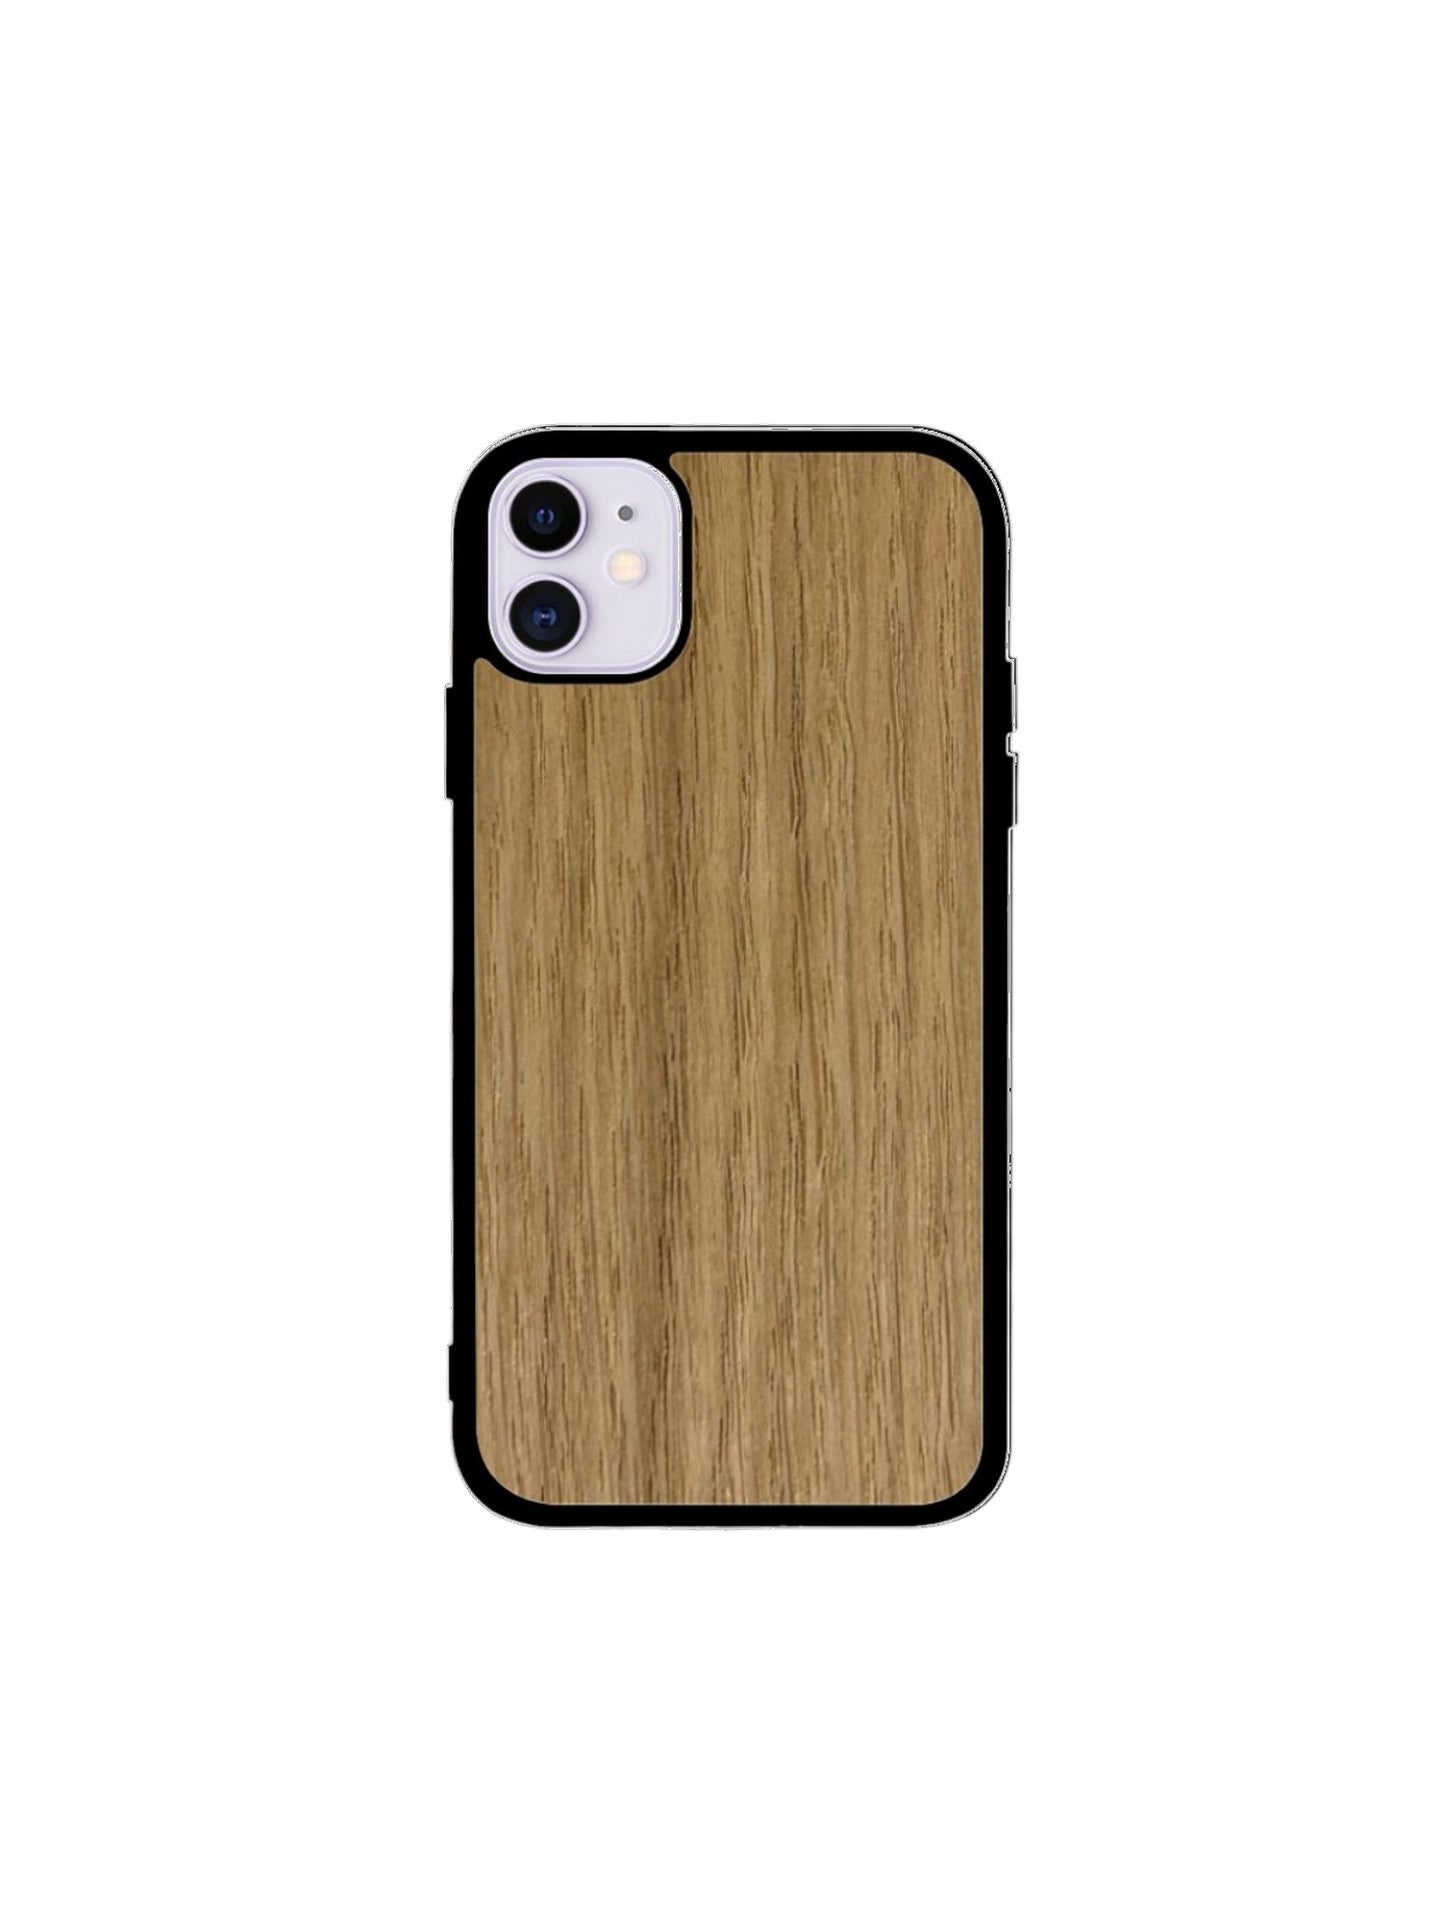 Iphone case - The simple